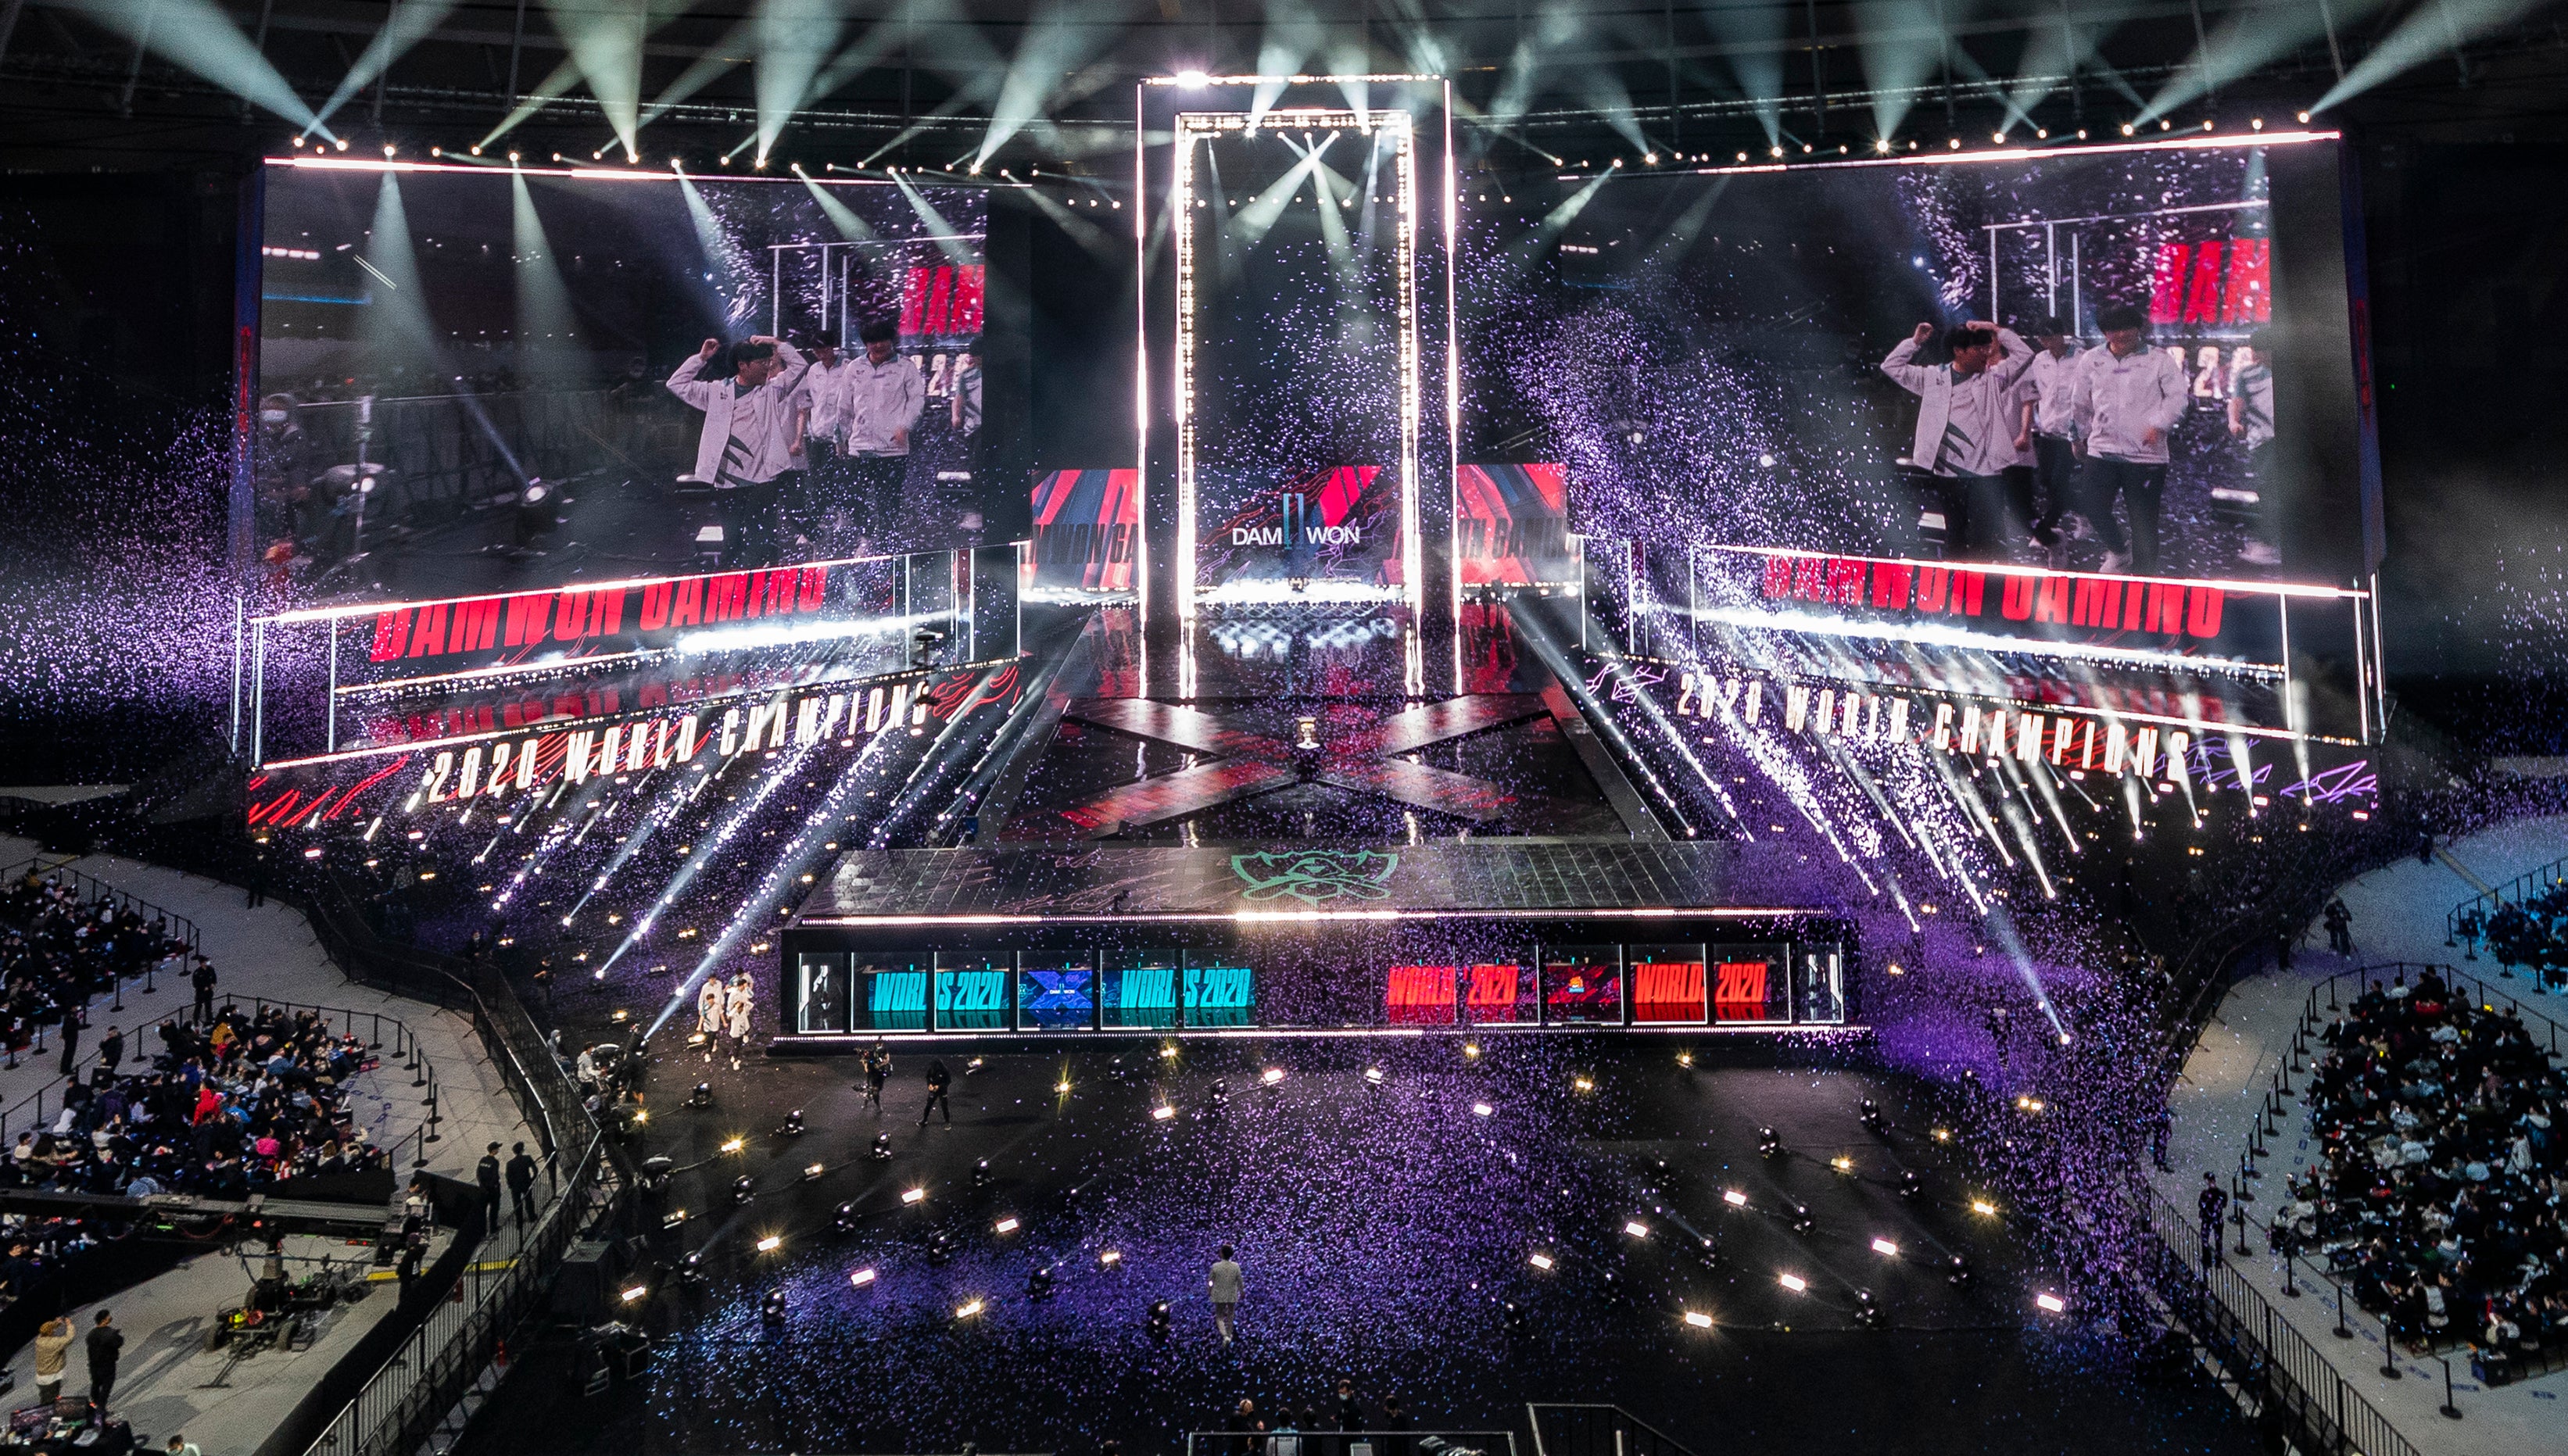 LoL State of the Game: the Worlds 2020 stage in Shanghai with a big crowd